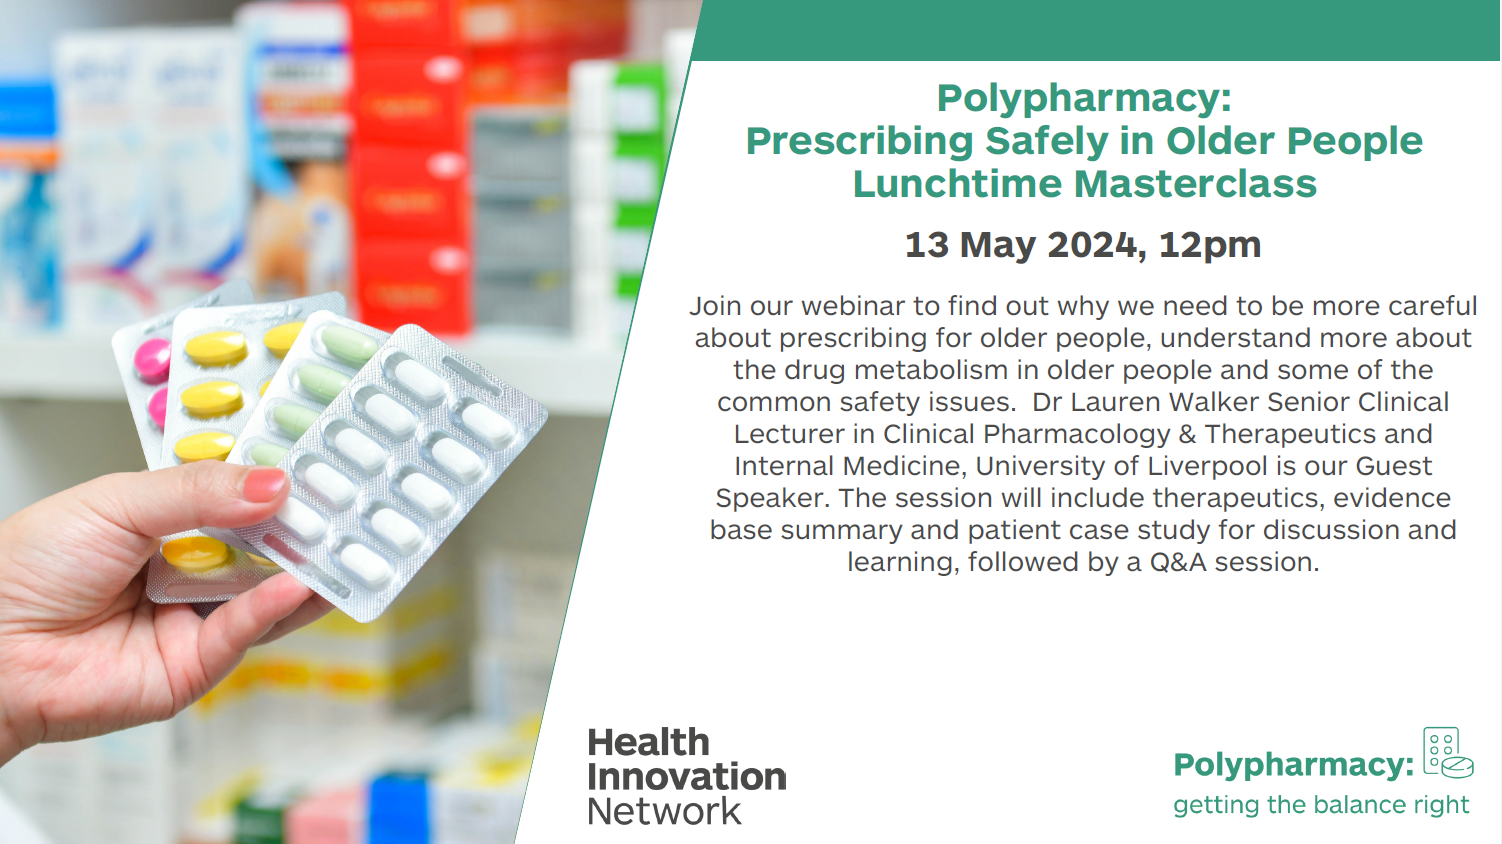 Polypharmacy: Prescribing Safely in Older People Lunchtime Masterclass